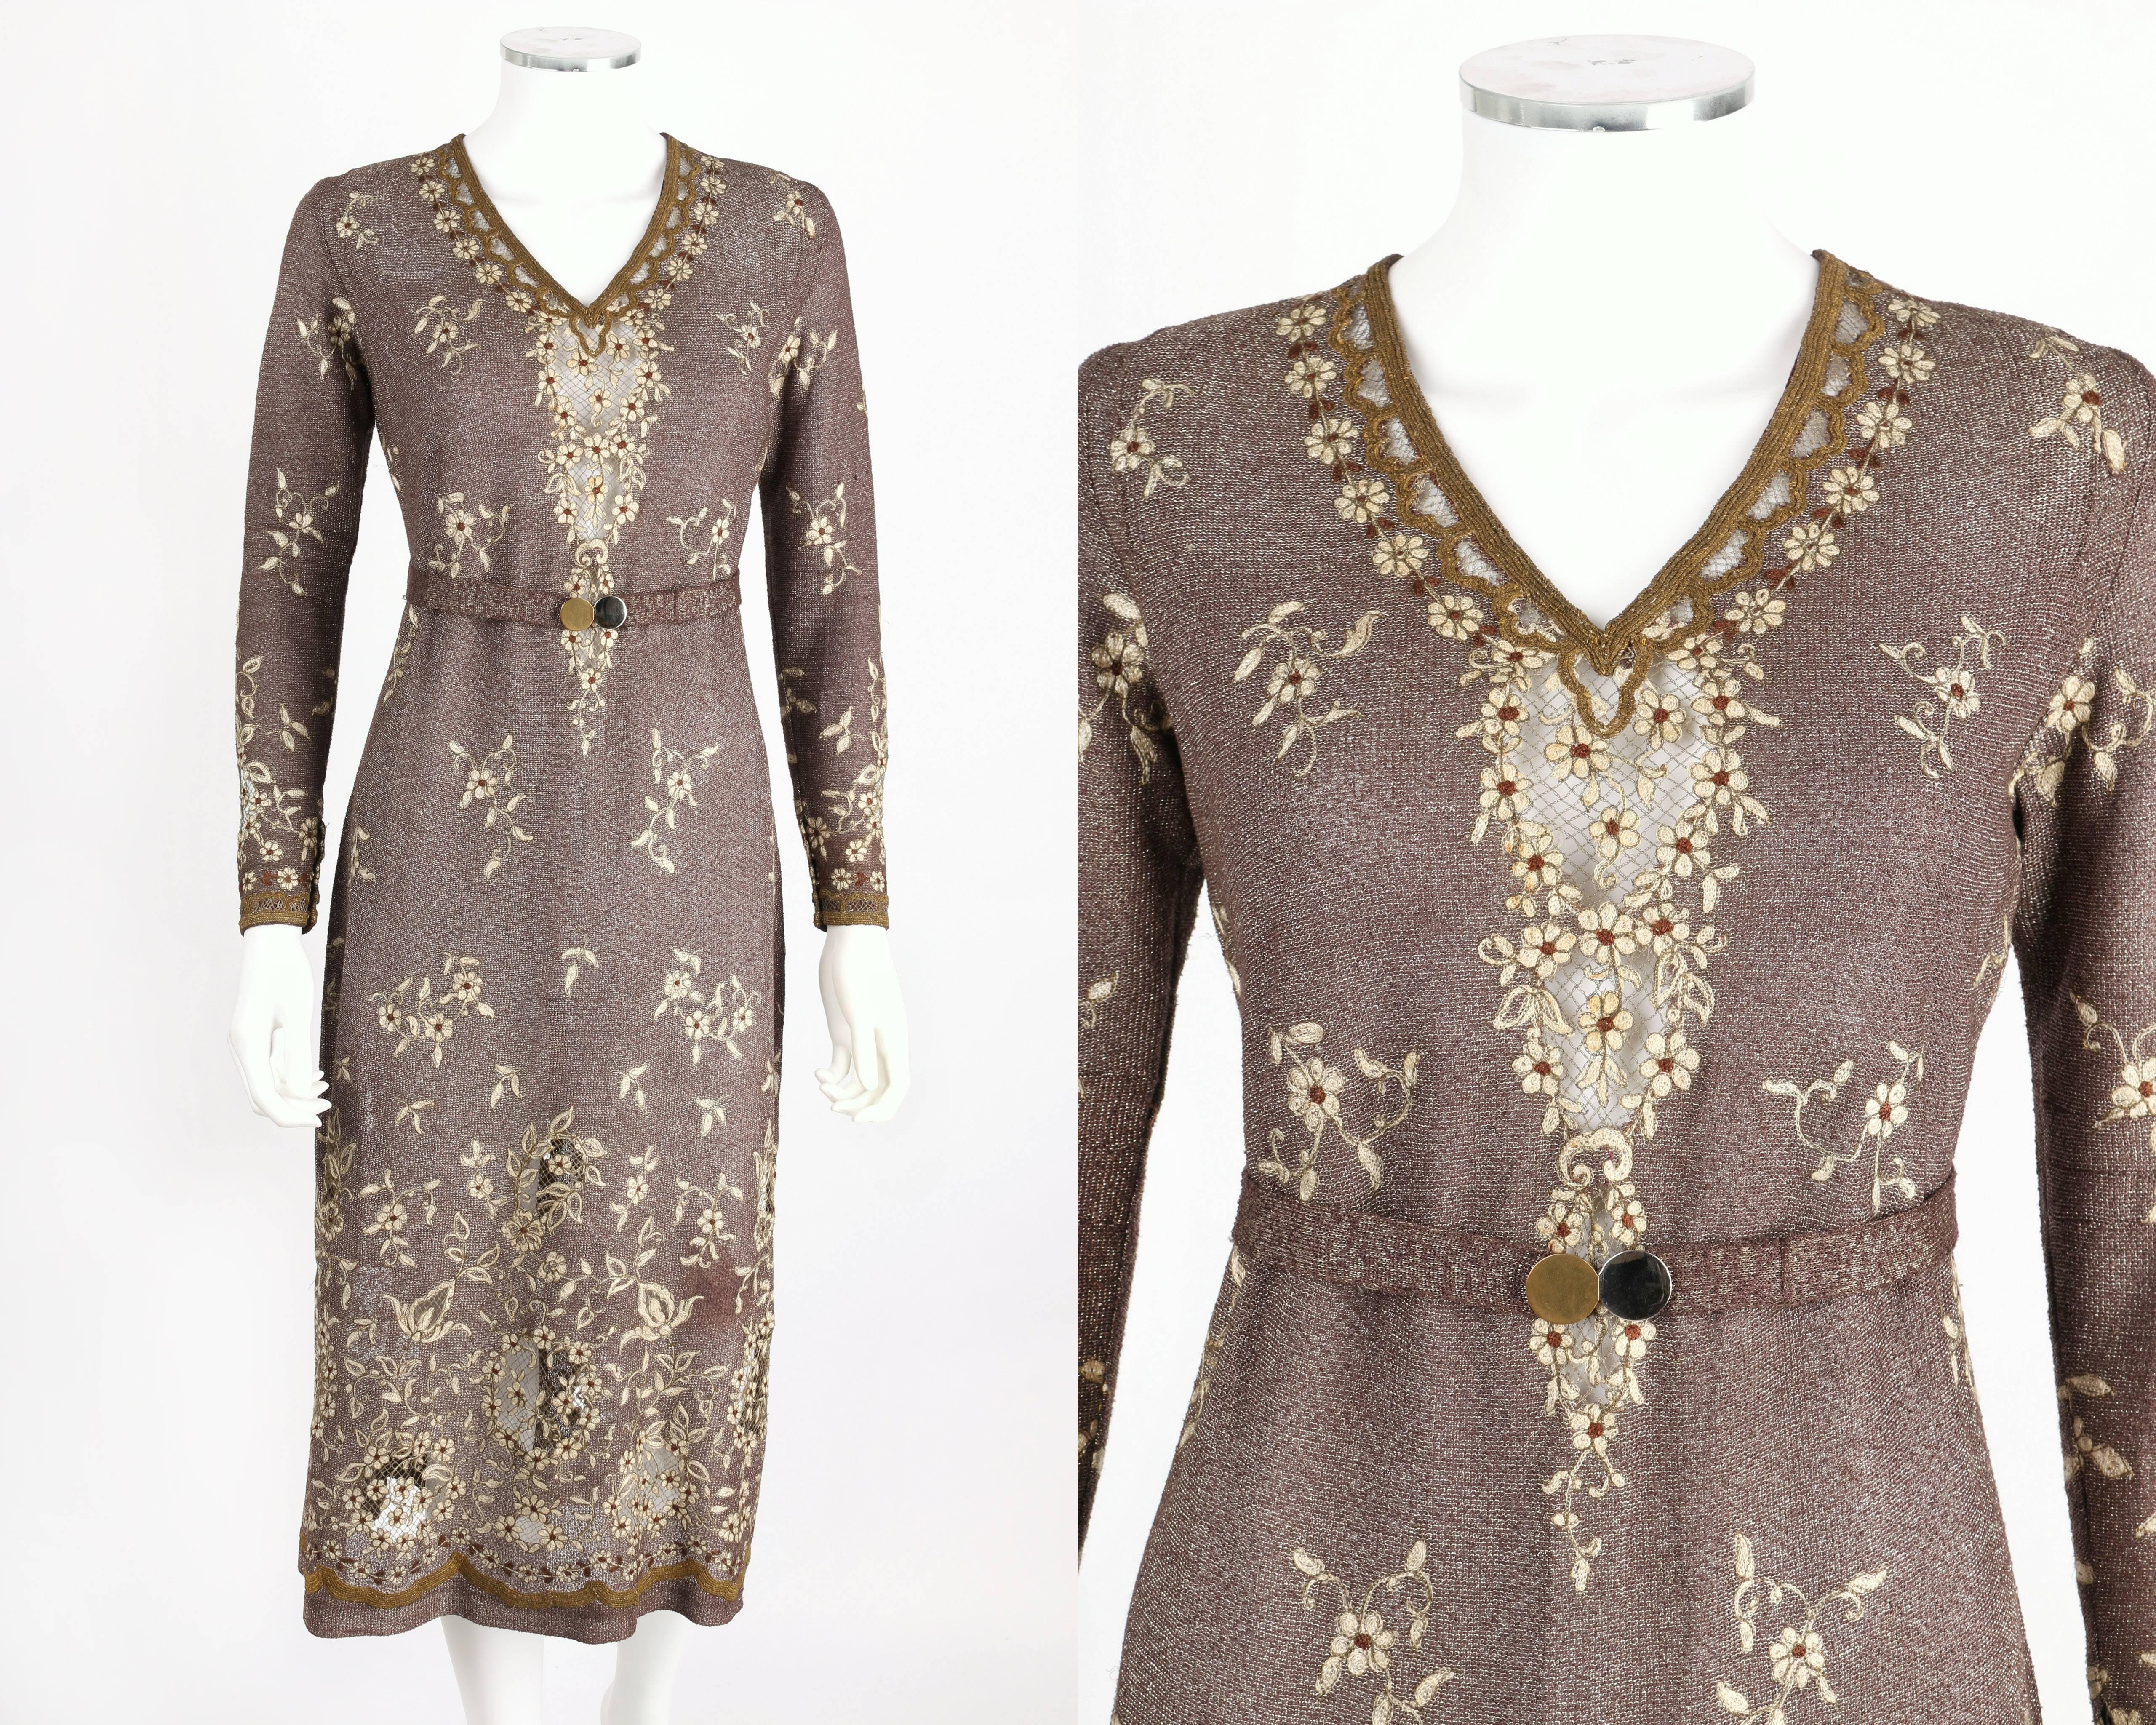 Incredibly unusual circa 1930s brown/bronze & silver metallic knit dress. Contains a partial label marked 